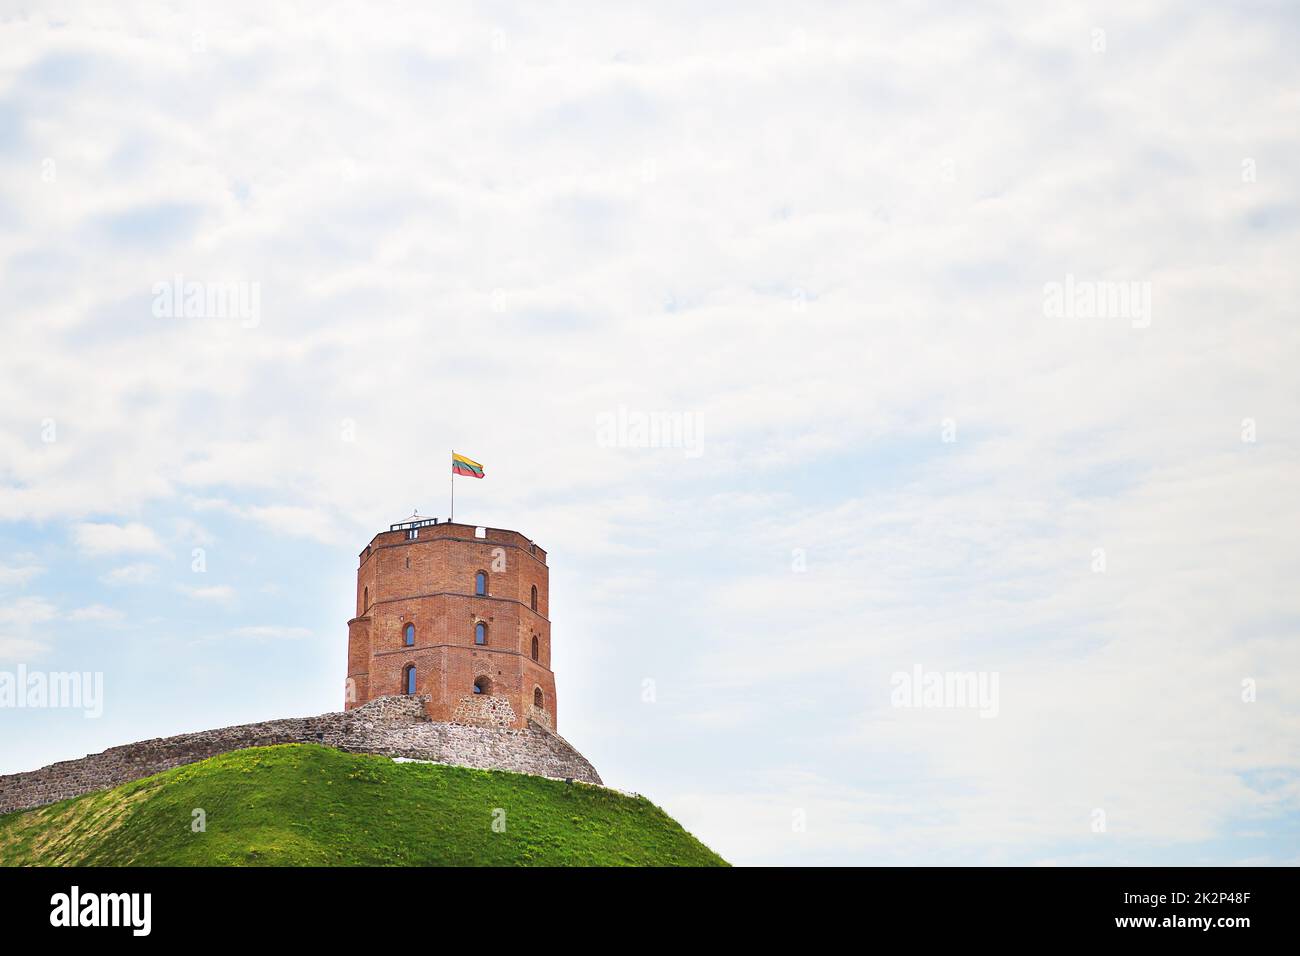 View of the castle on a green hill. Stock Photo